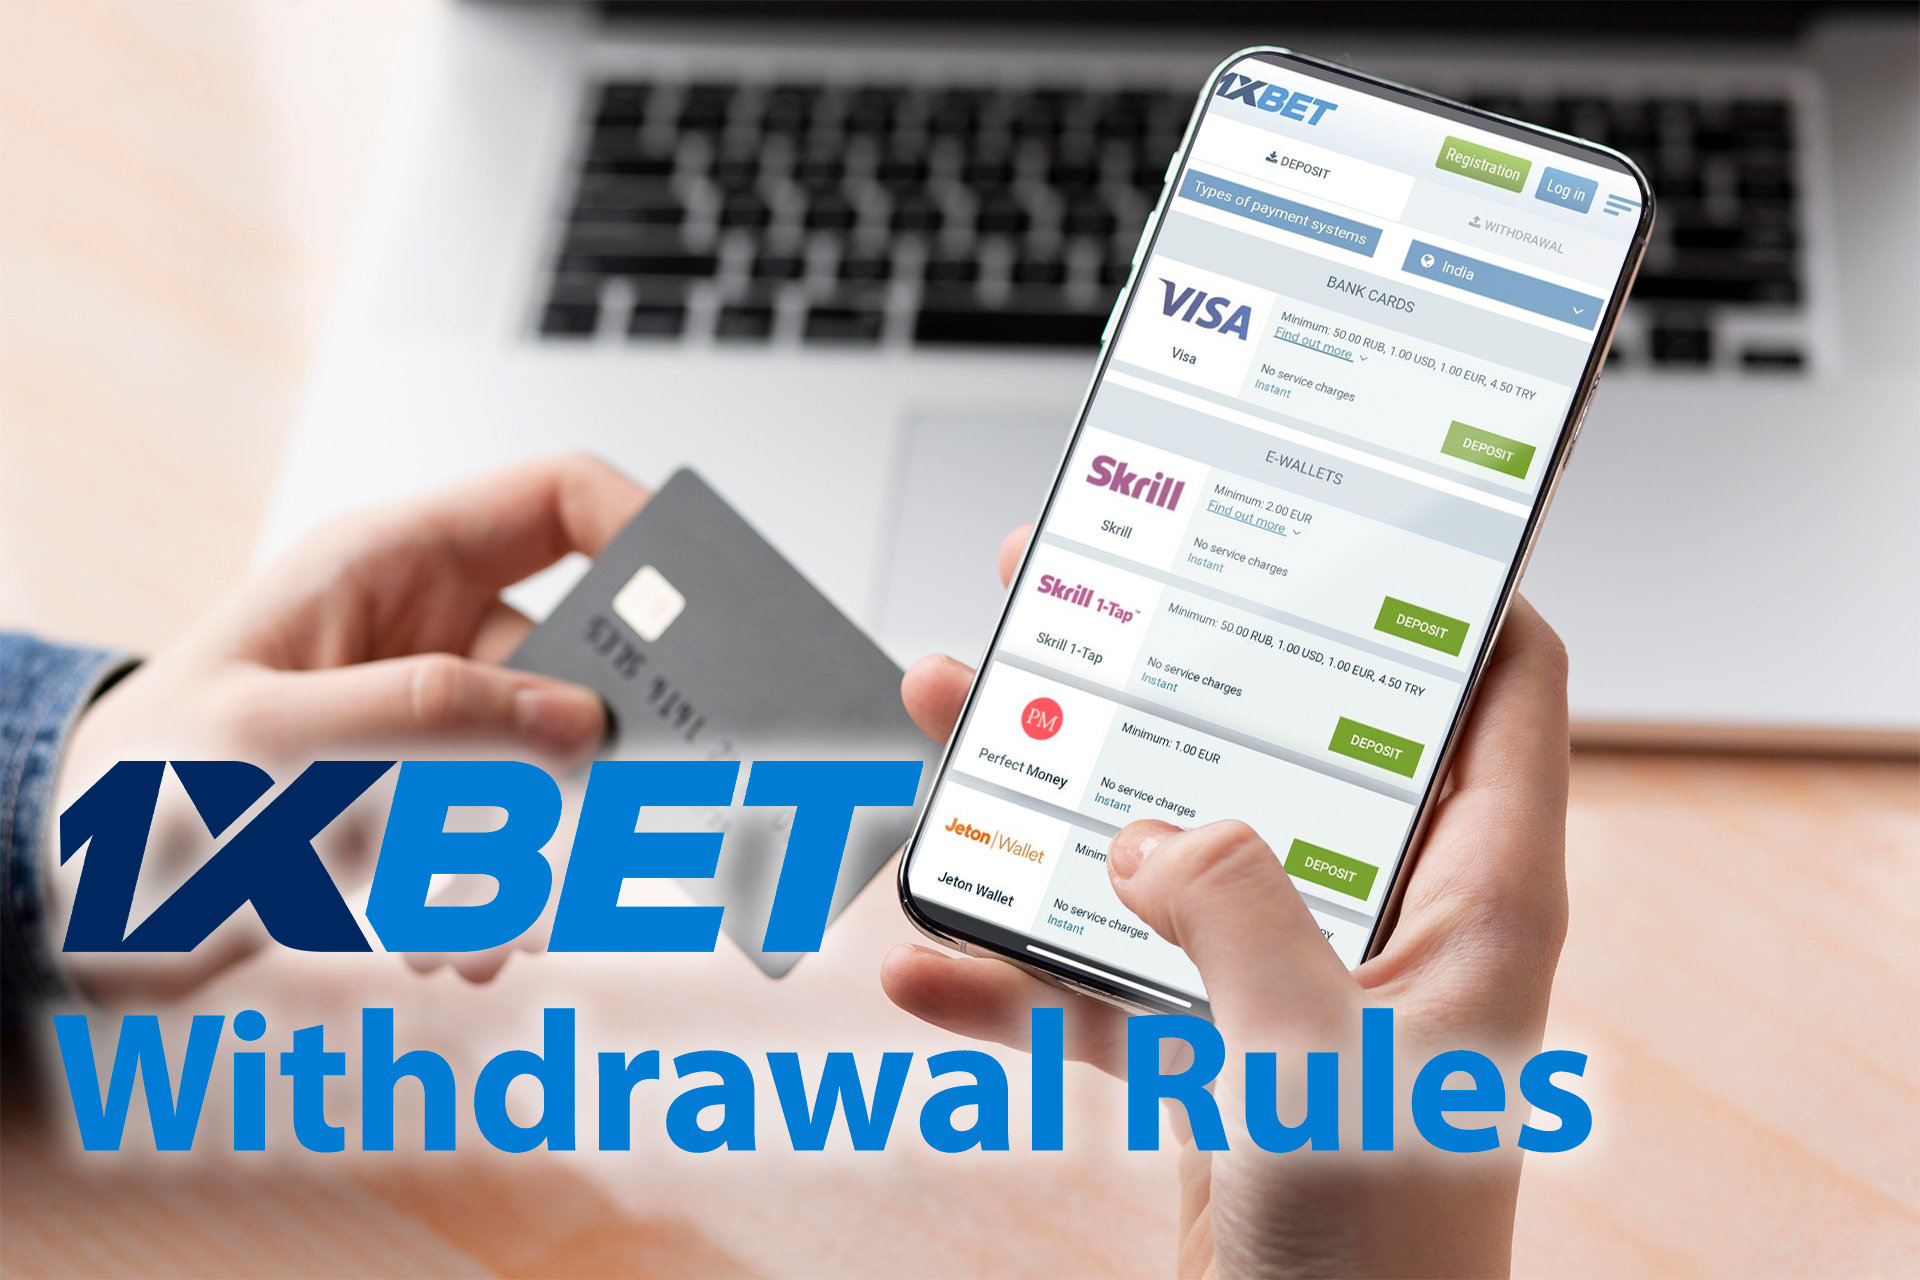 Get acquainted with the 1xBet withdrawal rules.